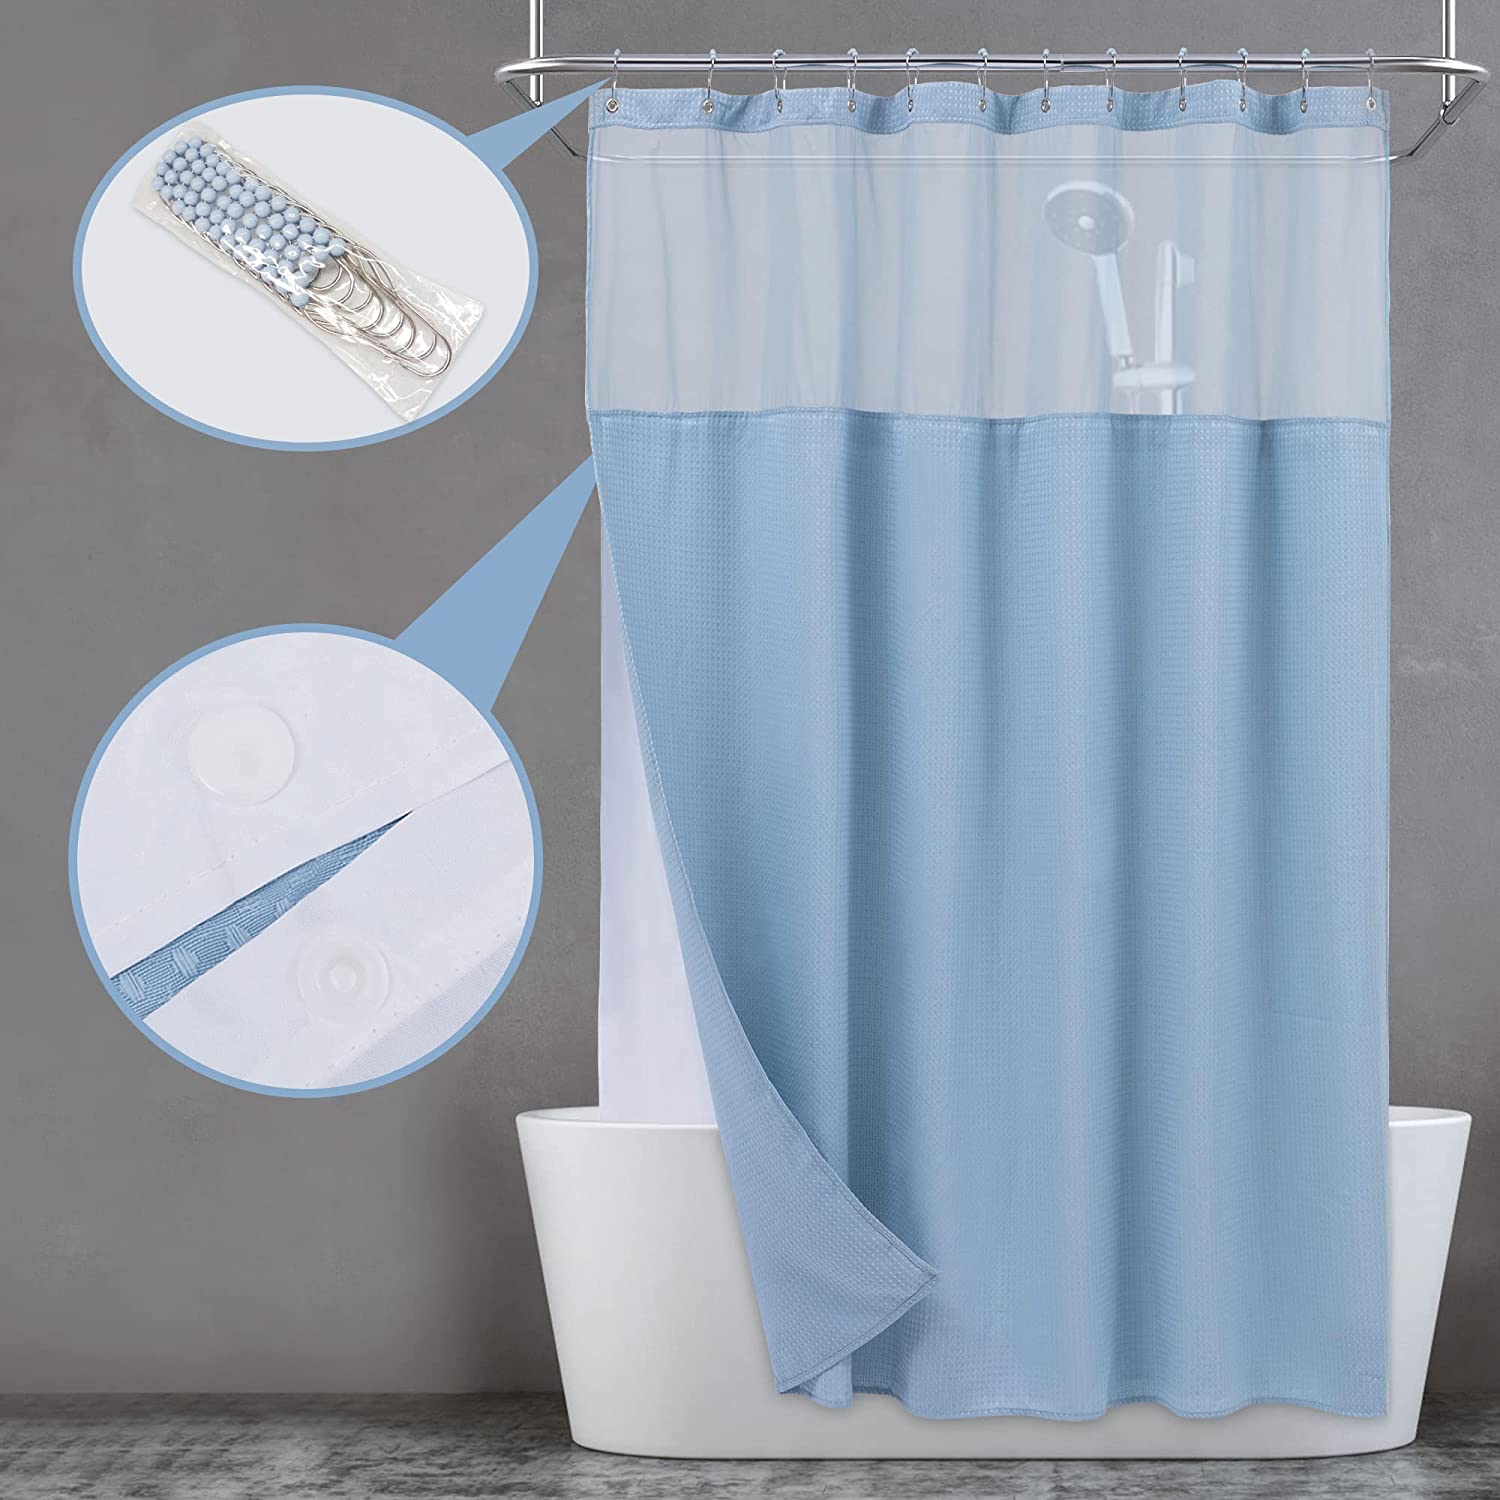 Waffle Weave Shower Curtain with Snap-in Fabric Liner Set, 12